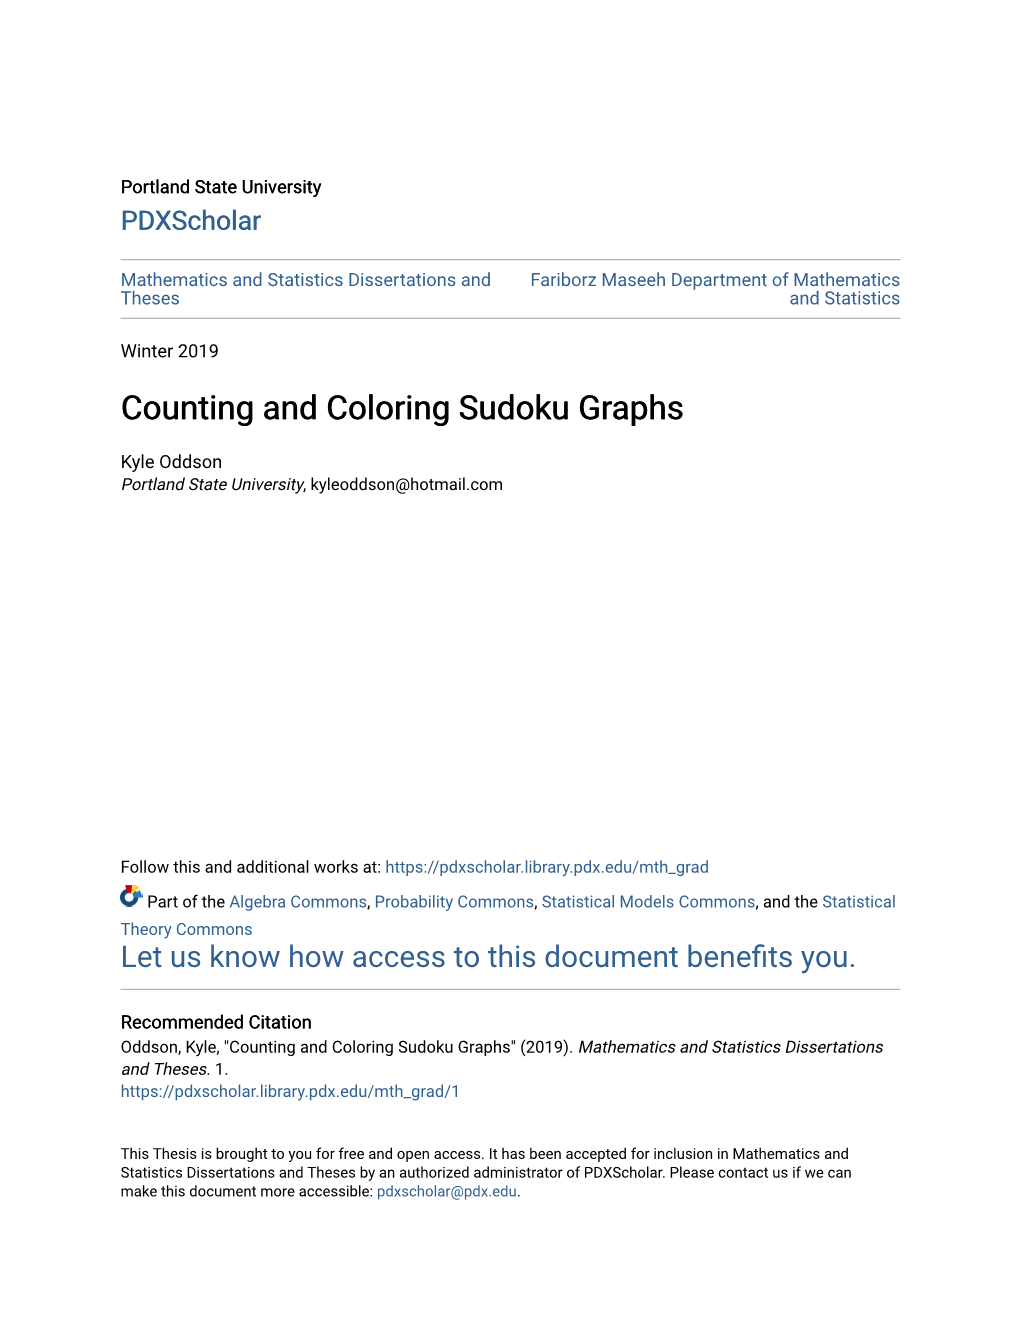 Counting and Coloring Sudoku Graphs